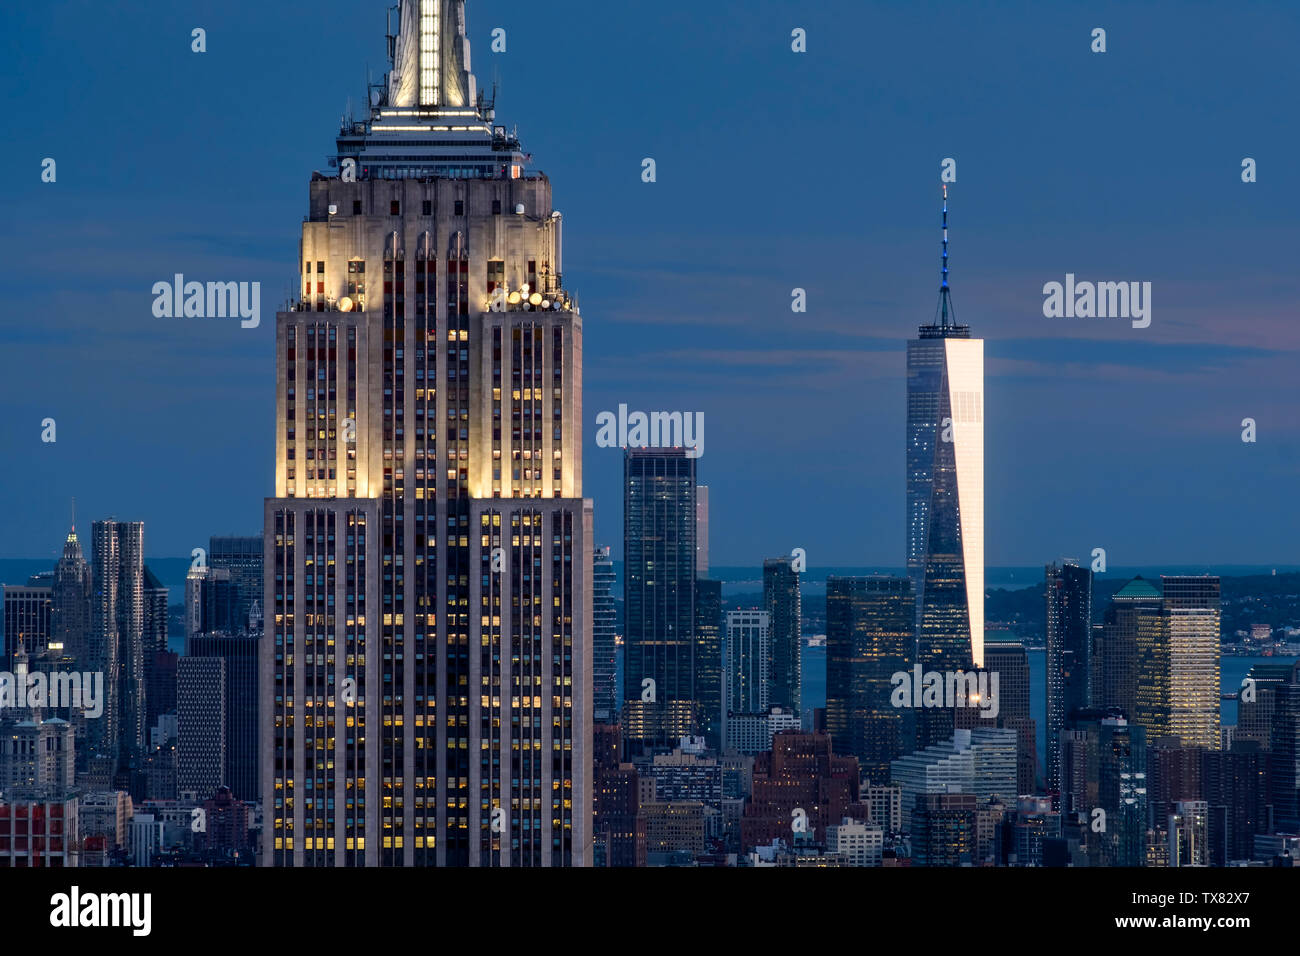 The Empire State Building and One World Trade Center at night, New York, USA Stock Photo